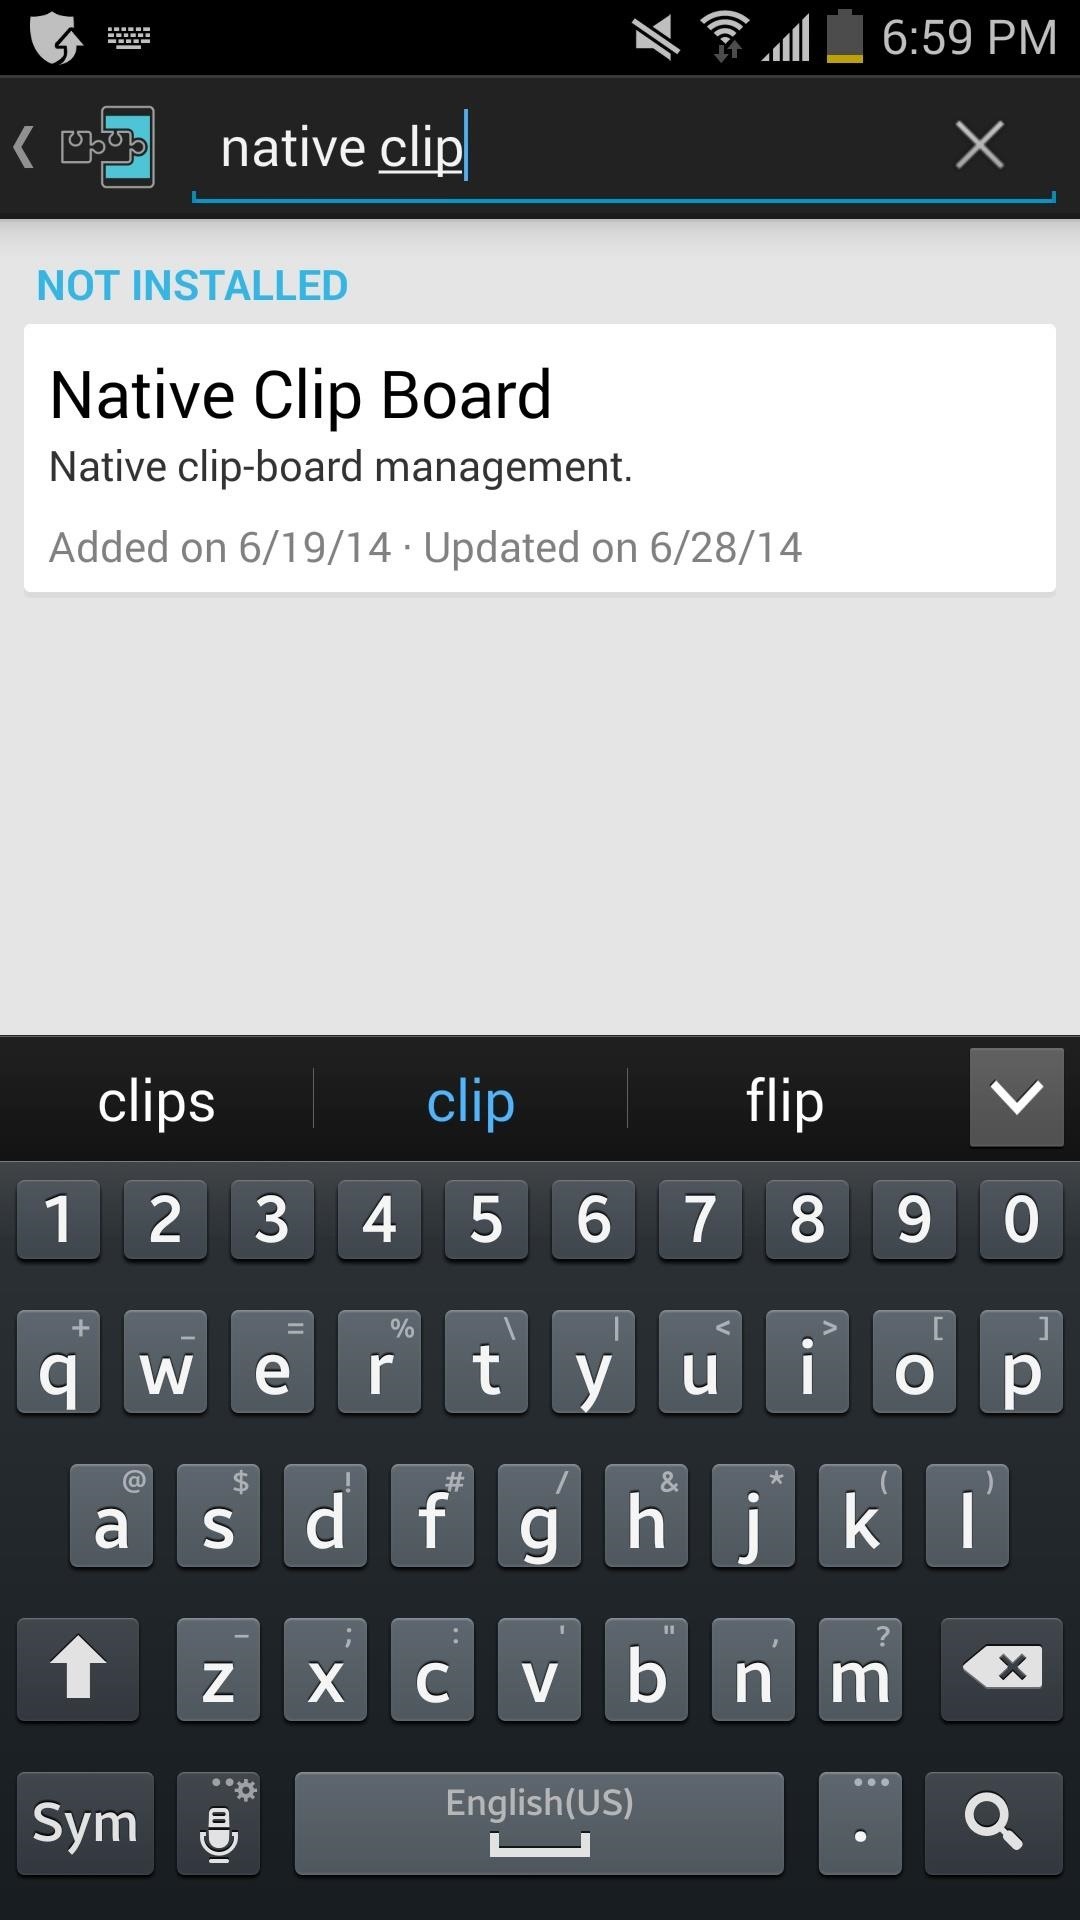 How to Add Native Clipboard Support to Your Samsung Galaxy Note 3